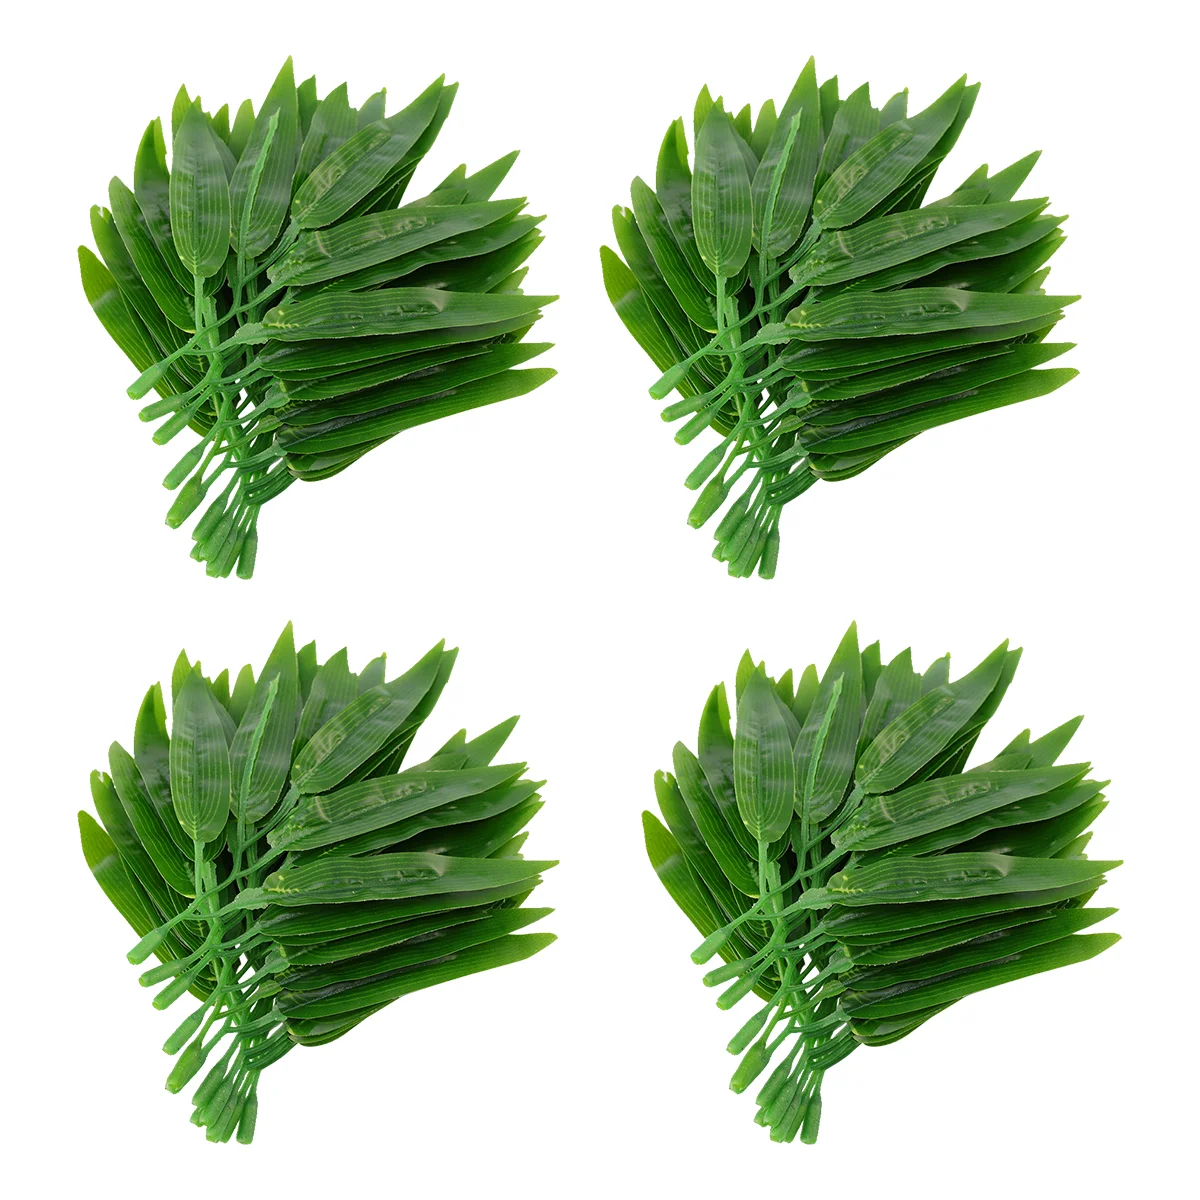 

Leaves Fakeplants Branches Artificial Simulated Greenerygreen Faux Stems Decor Leaf Craftstropical Palm Decoration Outdoor